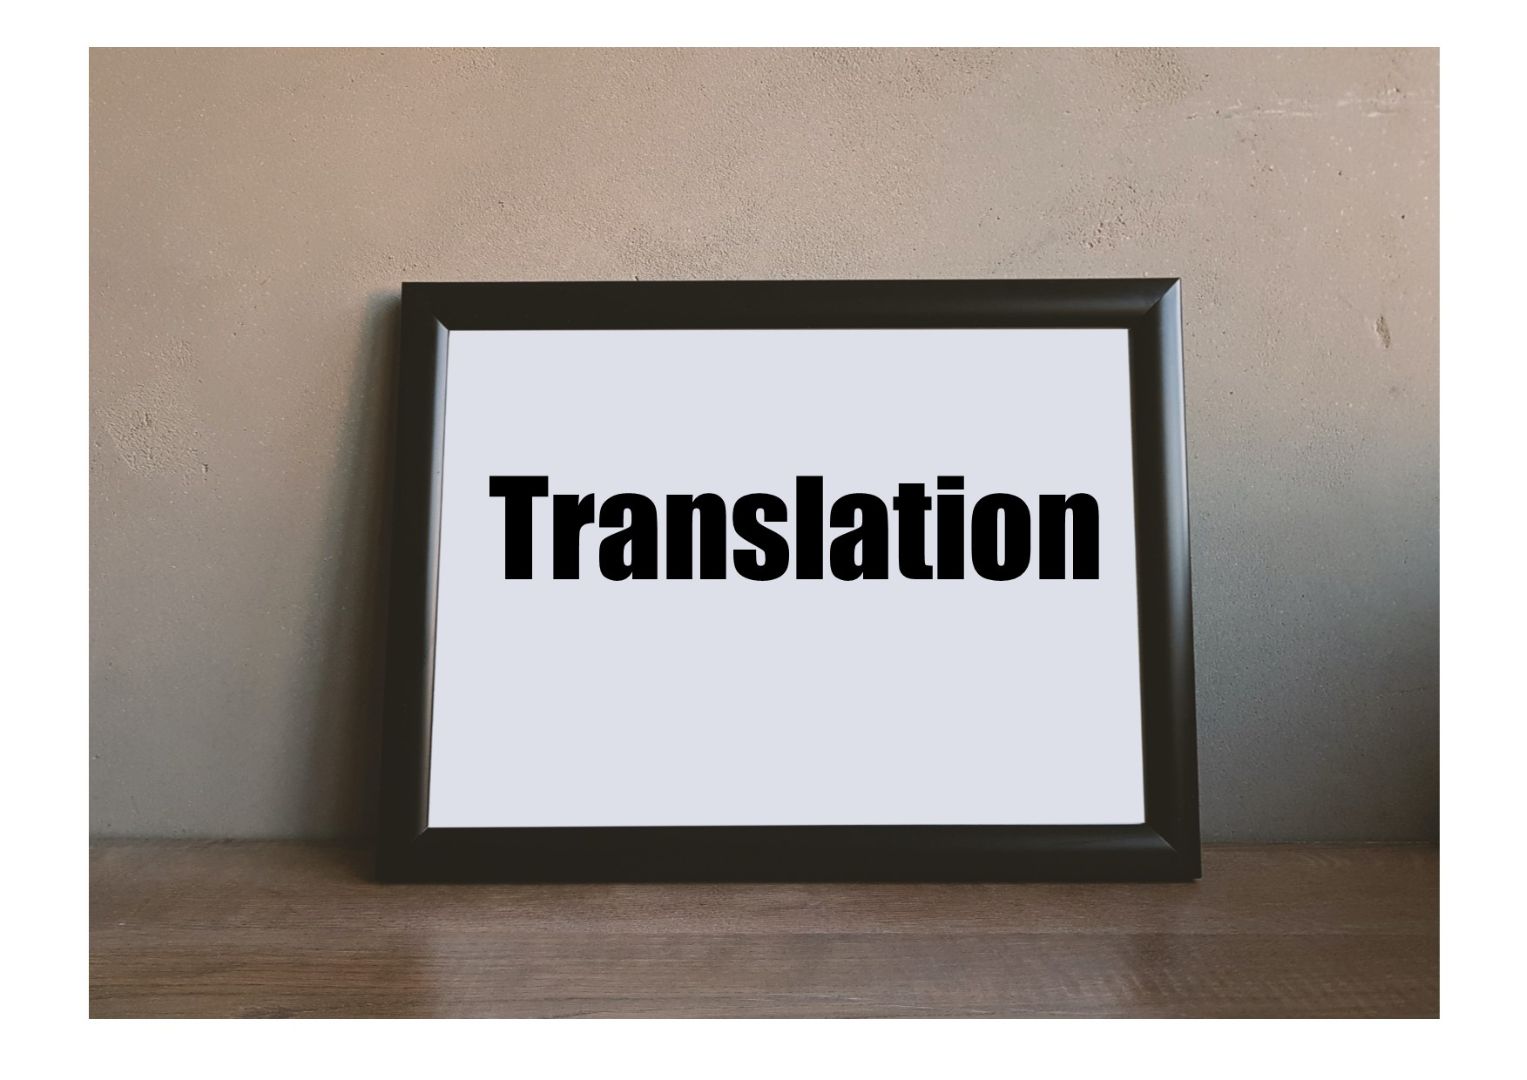 Black frame on brown background with 'Translation' written in frame